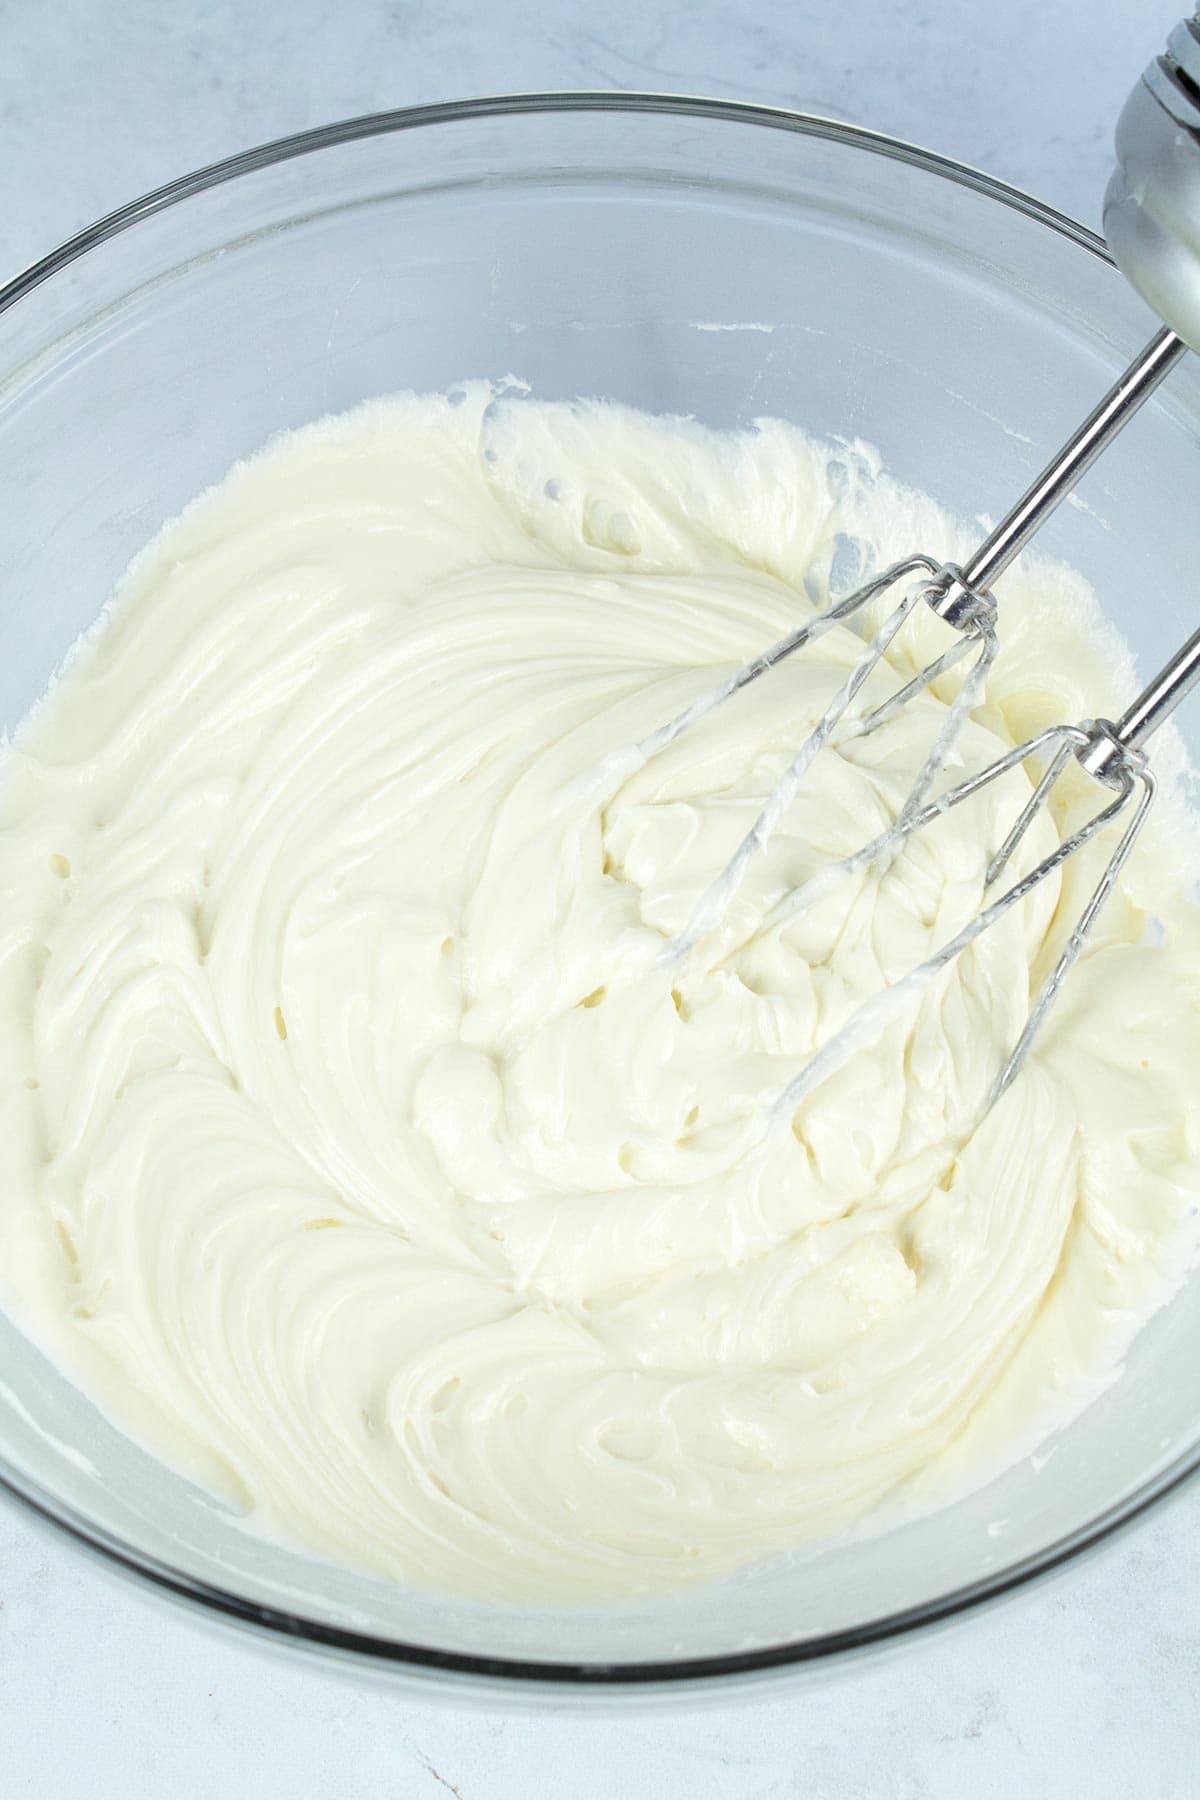 Cream cheese frosting whipped up to a light and fluffy consistency.